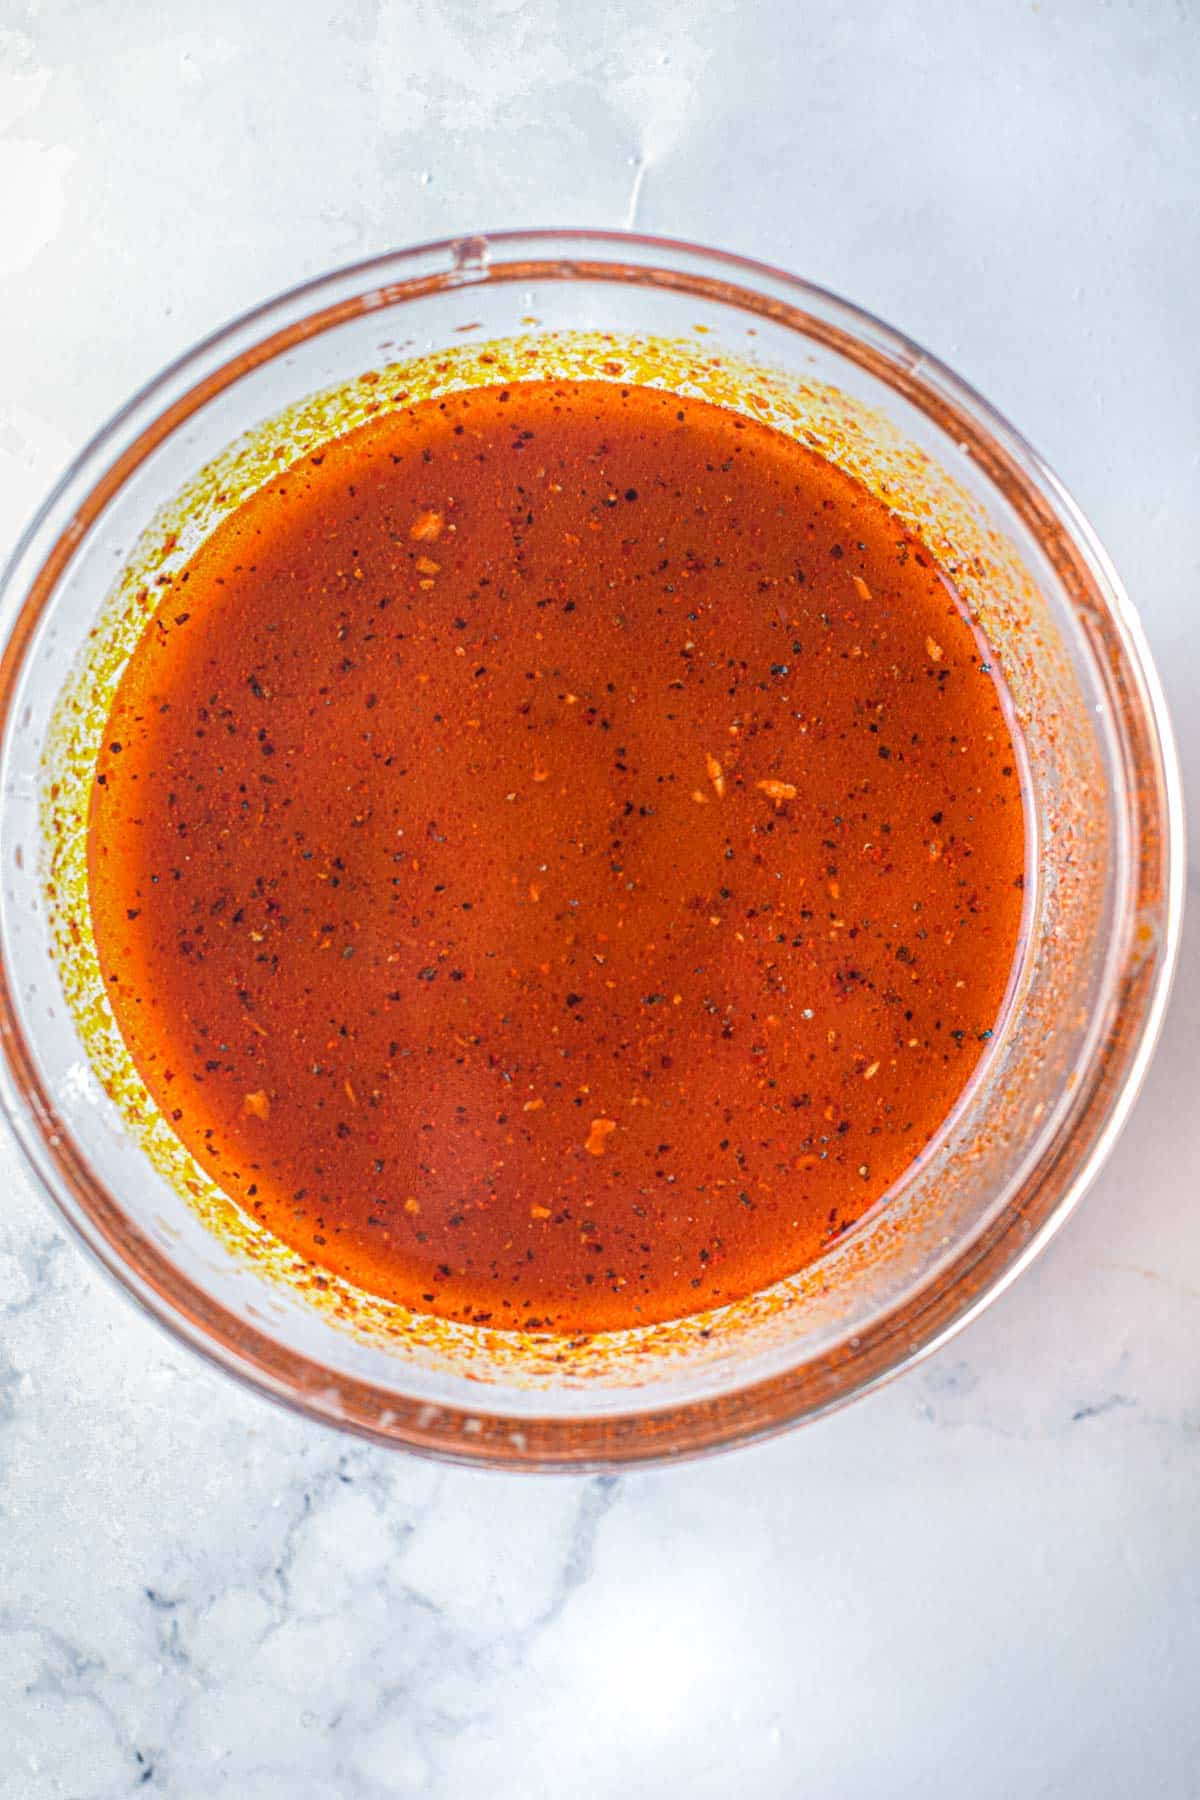 sauce mixture in a bowl